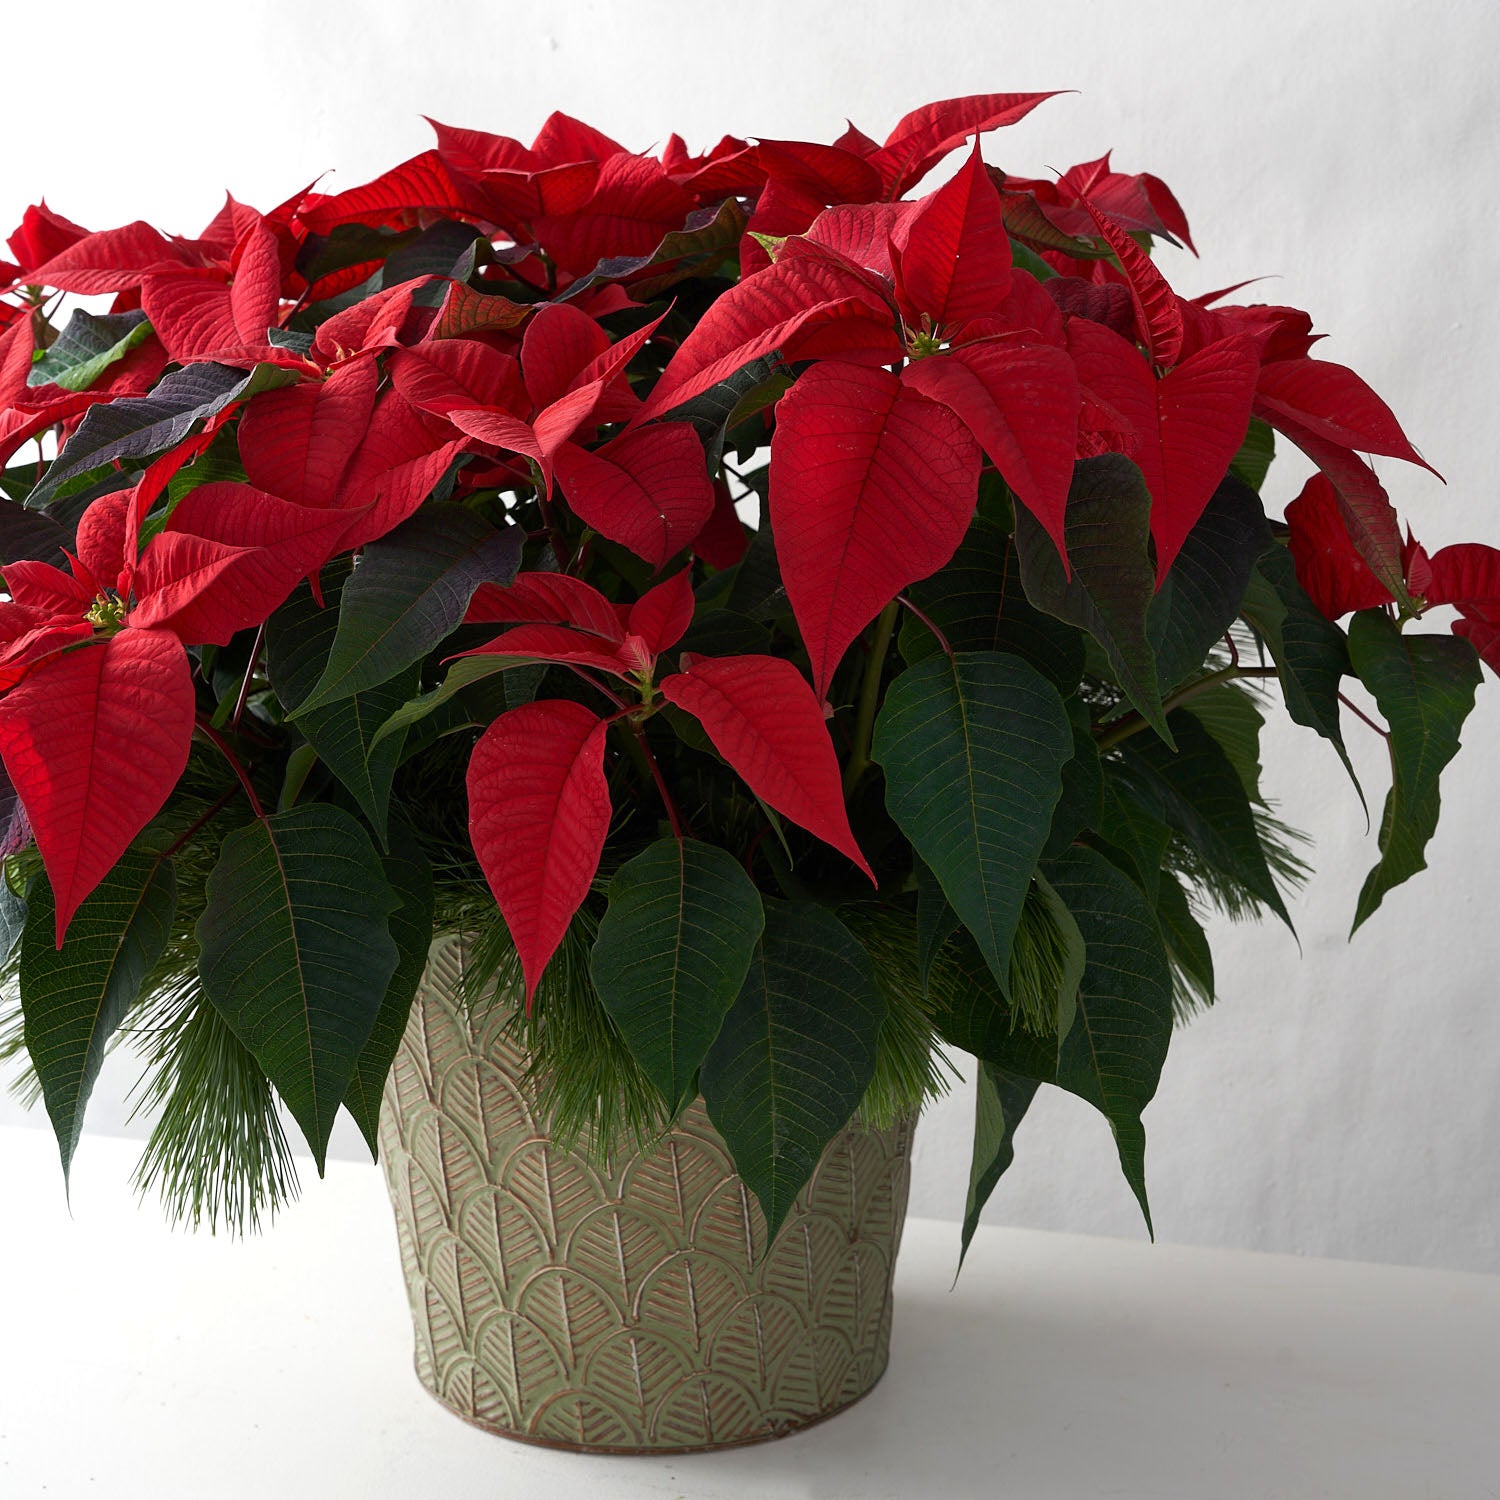 Red poinsettia plant in tin pot with pine boughs.